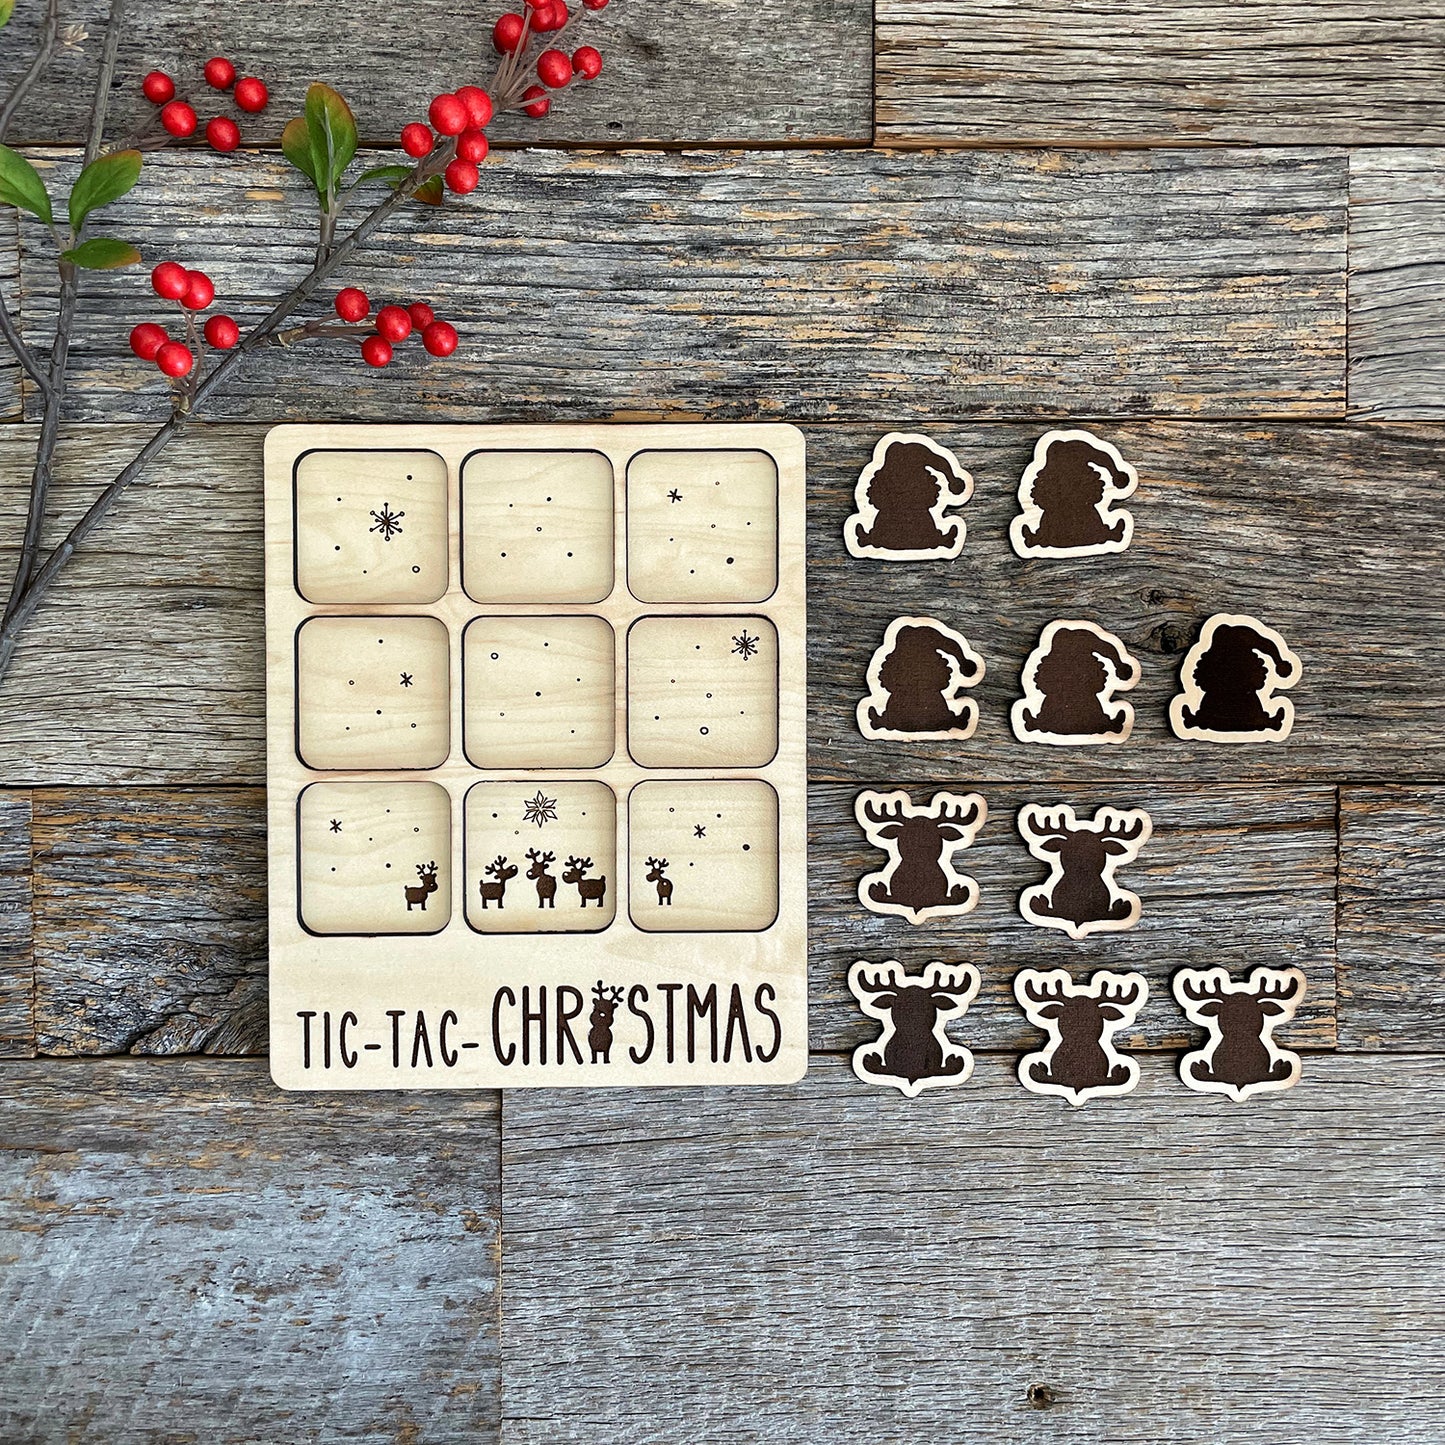 Personalized Christmas Tic Tac Toe with Adorable Santa Claus and Reindeer Game Pieces